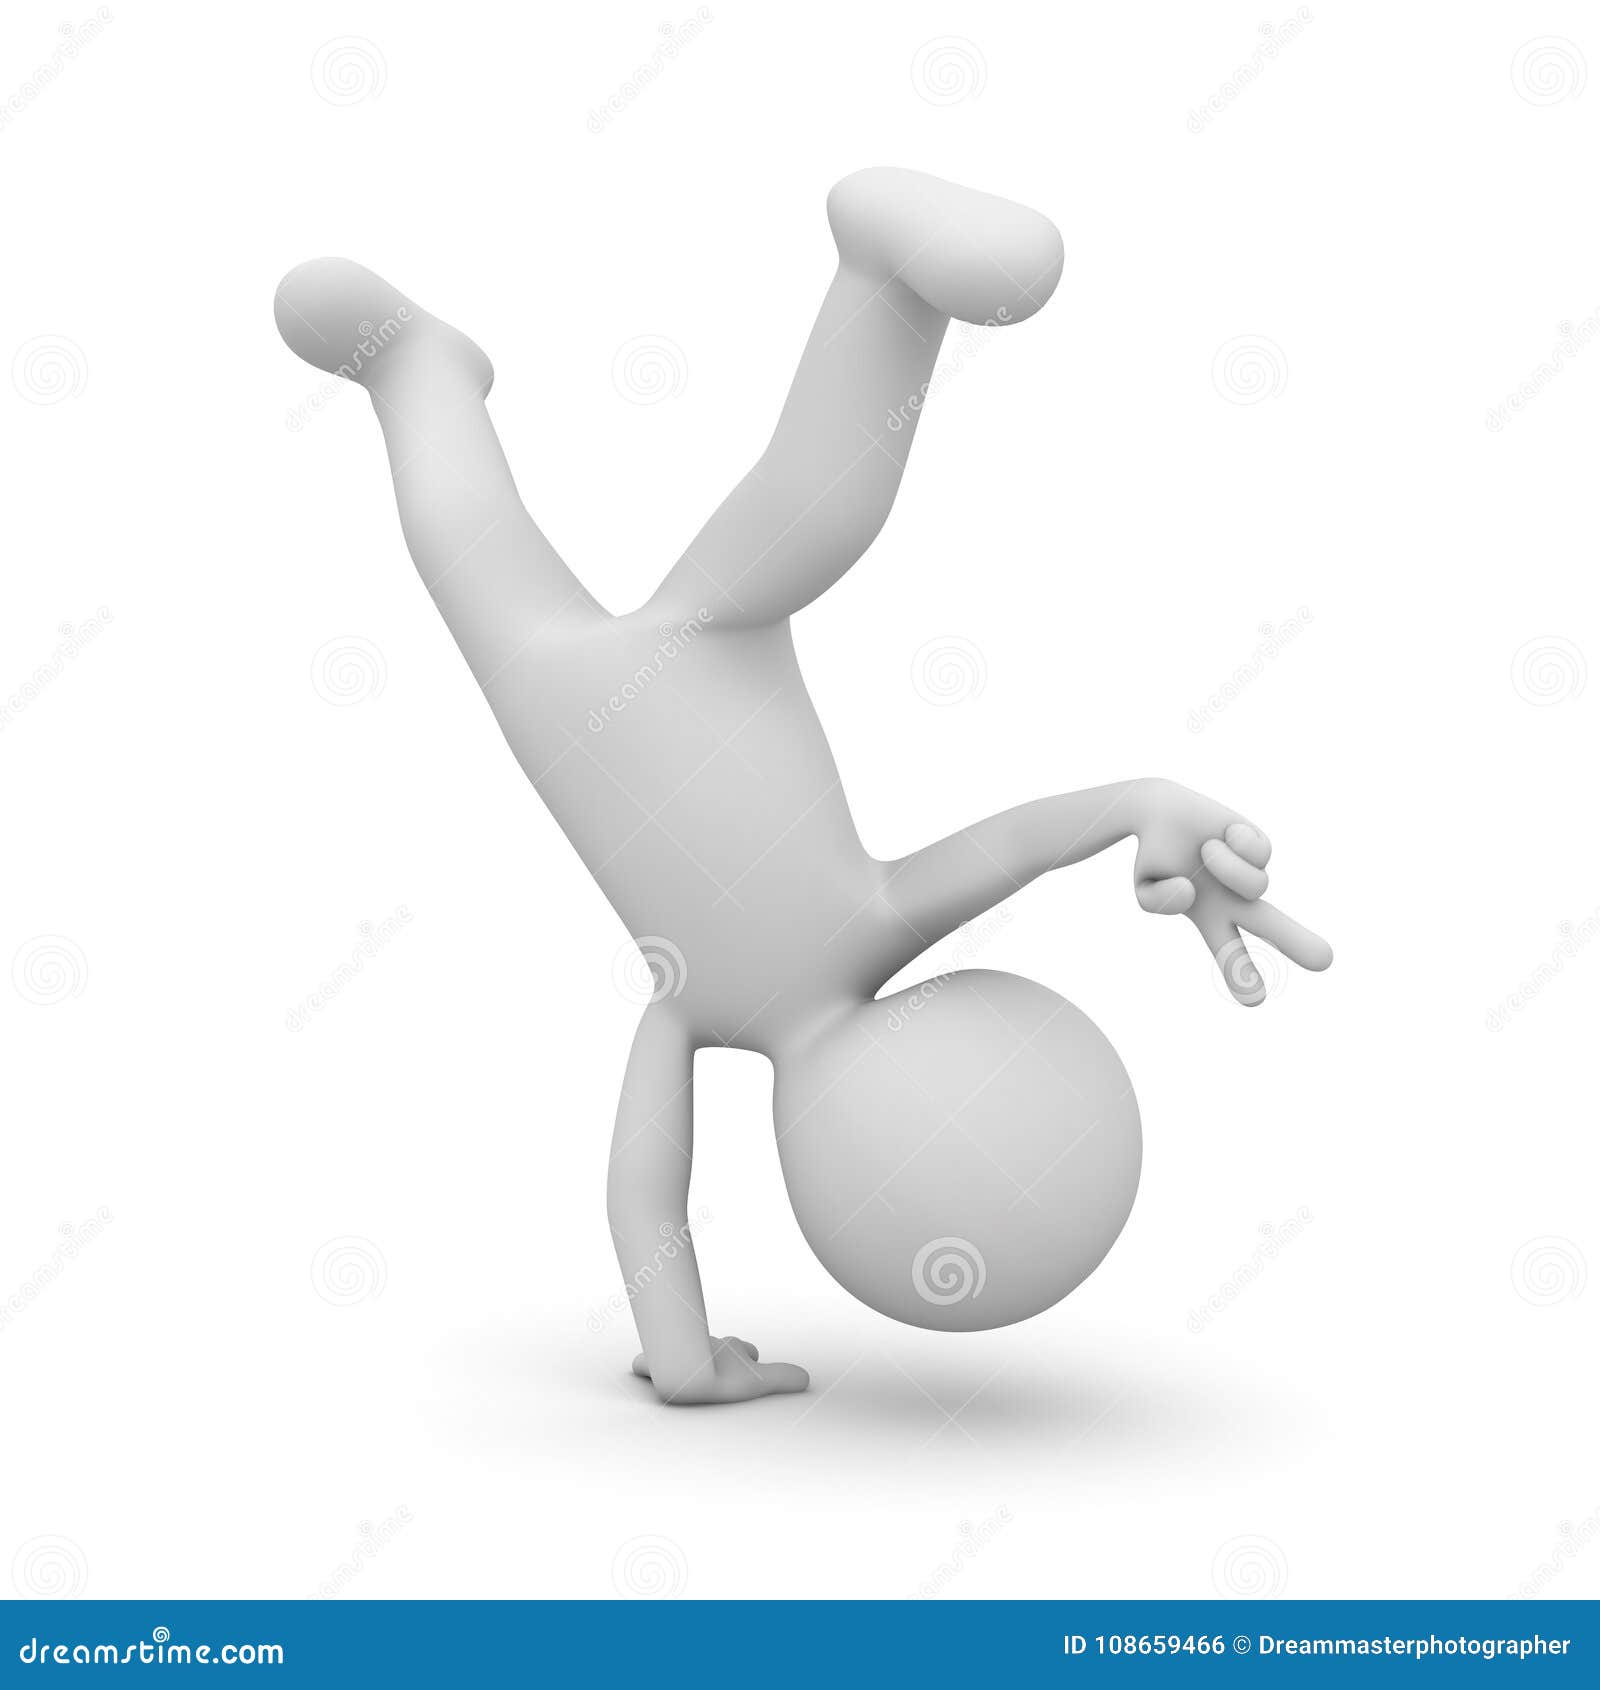 Cartwheel Gymnastics Stock Illustrations 24 Cartwheel Gymnastics Stock Illustrations Vectors Clipart Dreamstime Get ready to tumble with this cute boys gymnastics clipart set! https www dreamstime com d man doing cartwheel showing victory v hand sign isolated white background shadow d man doing cartwheel showing image108659466